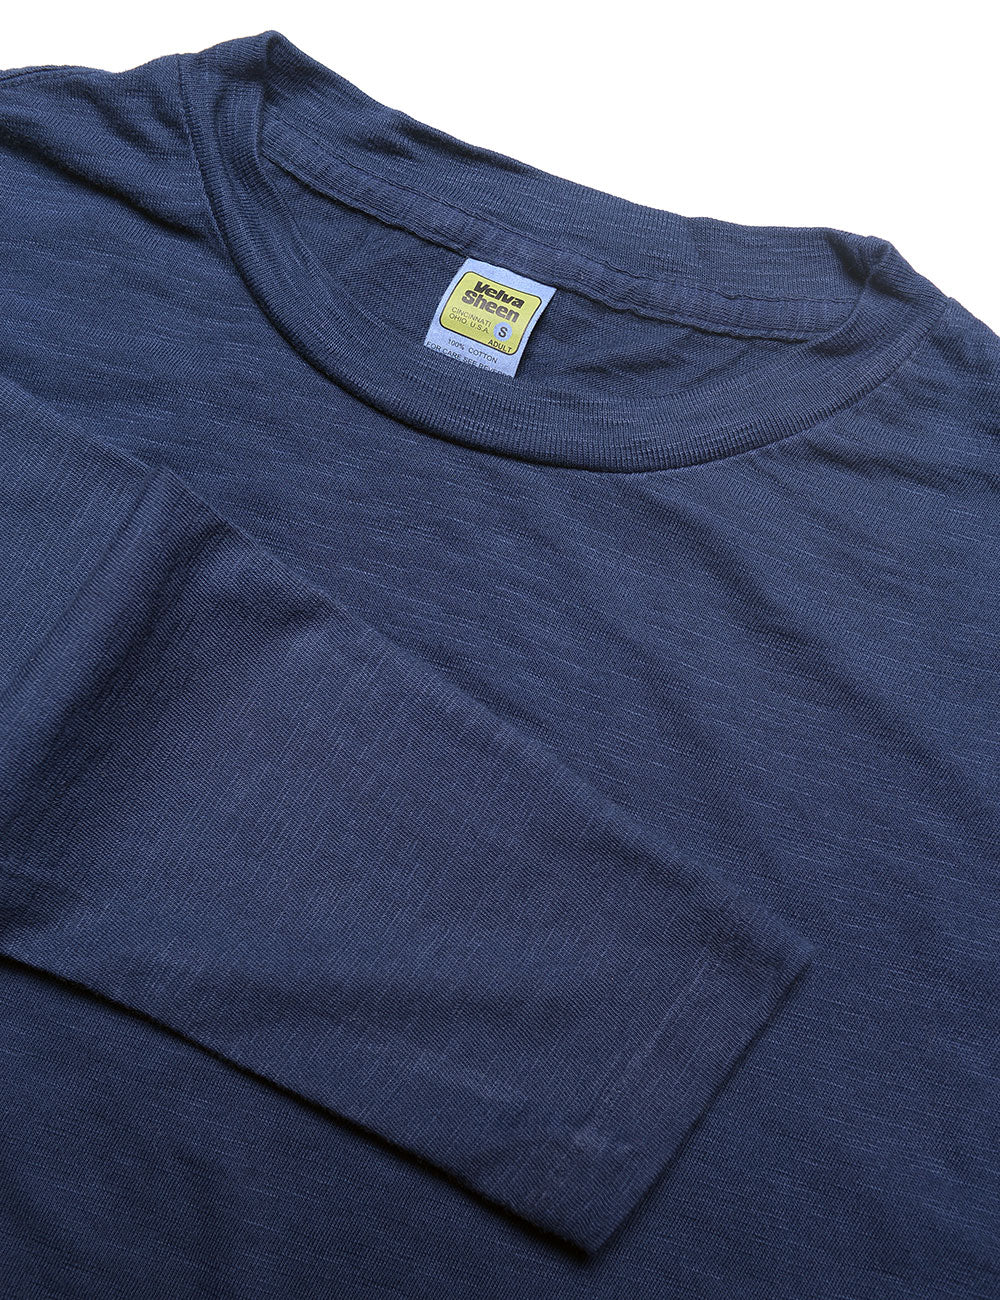 Detail of Velva Sheen Long Sleeve Crewneck T-Shirt in Navy showing collar, sleeve and fabric texture